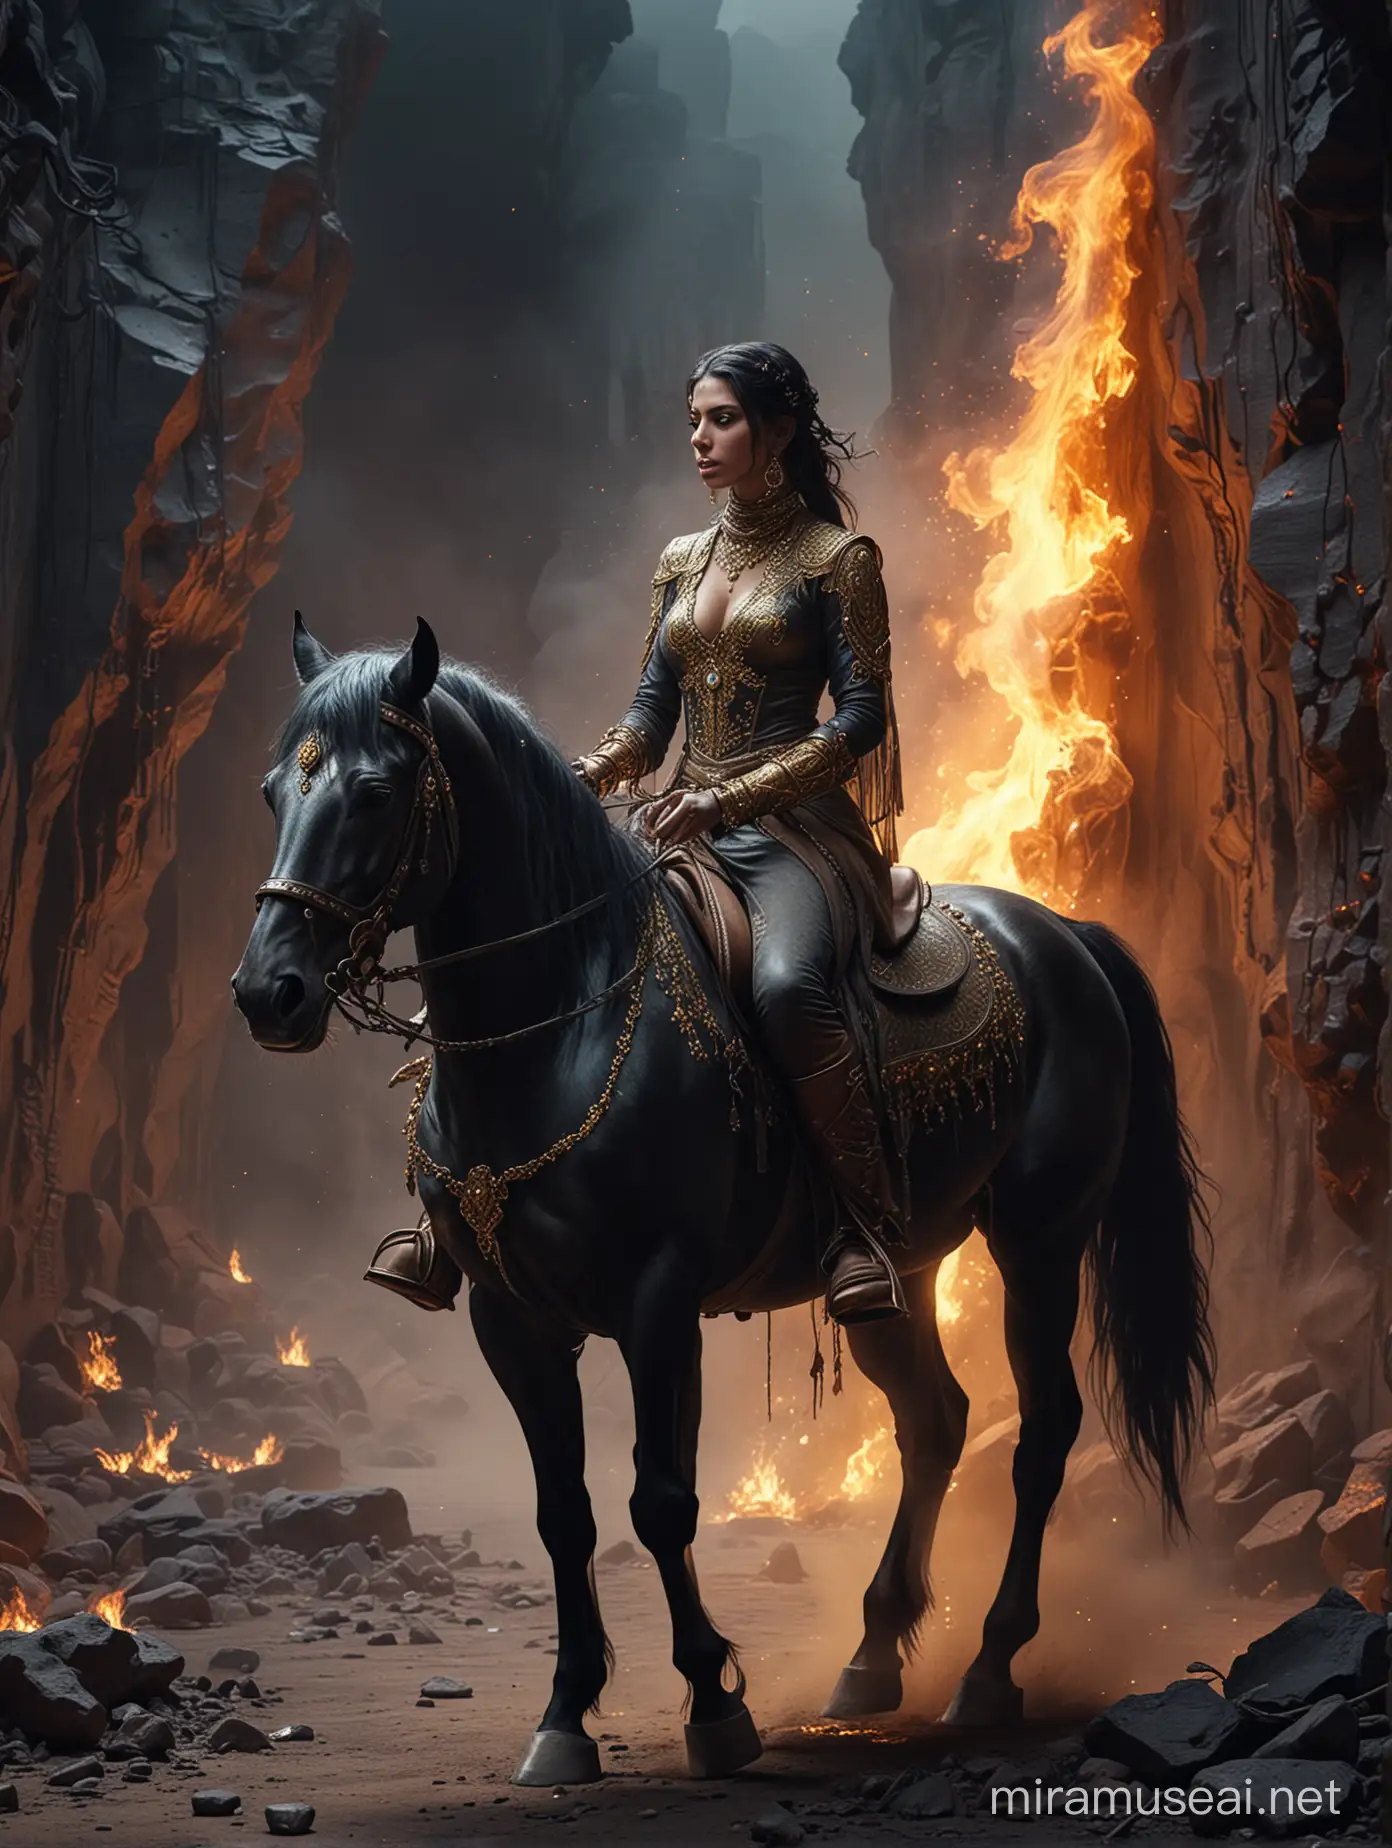 Arabian Woman has Tattoo, She is wearing gold jewelry and sparkling and gems bioluminescent glow, She is ridding a Horse, In Hell, Rocks, Fire, encounter A cracked black wall, With Weird Creatures, Full Details, cinematic, Action, Long Shoot, Dramatic landscape, putty-smeared surface with cracks and the remains of peeling color textures. Mixed, Baroque style. with colored smoke, 8k resolution, dynamic lighting, Oil painting